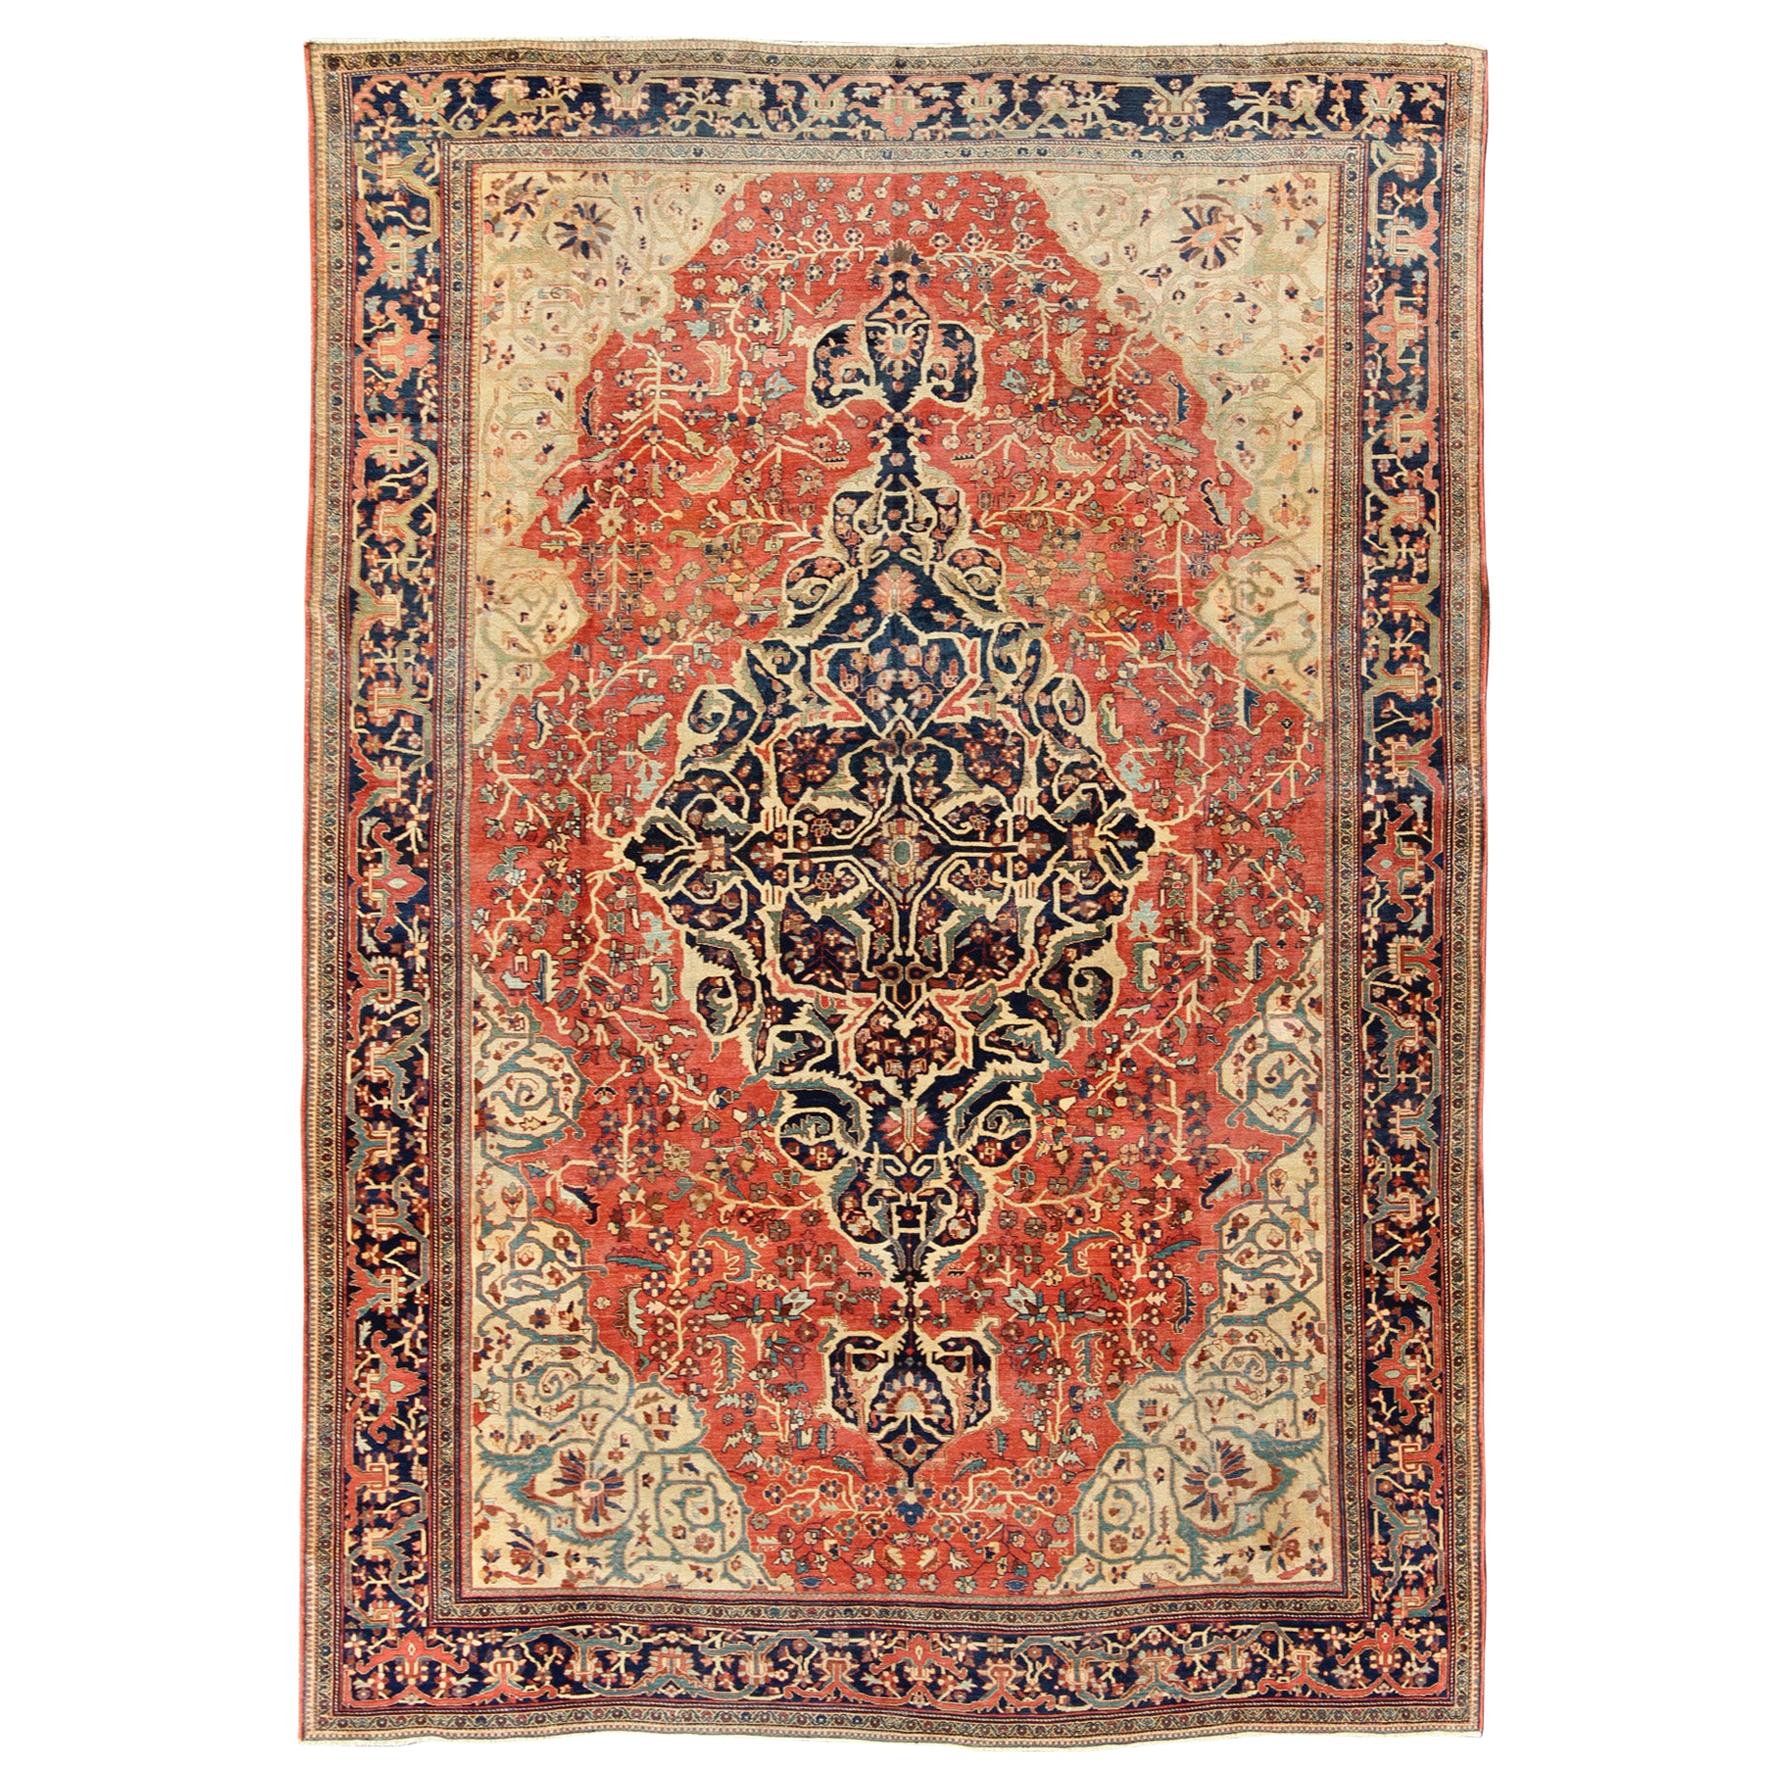 Multi-Layered Medallion Antique Persian Sarouk-Ferahan Rug in Red and Blue